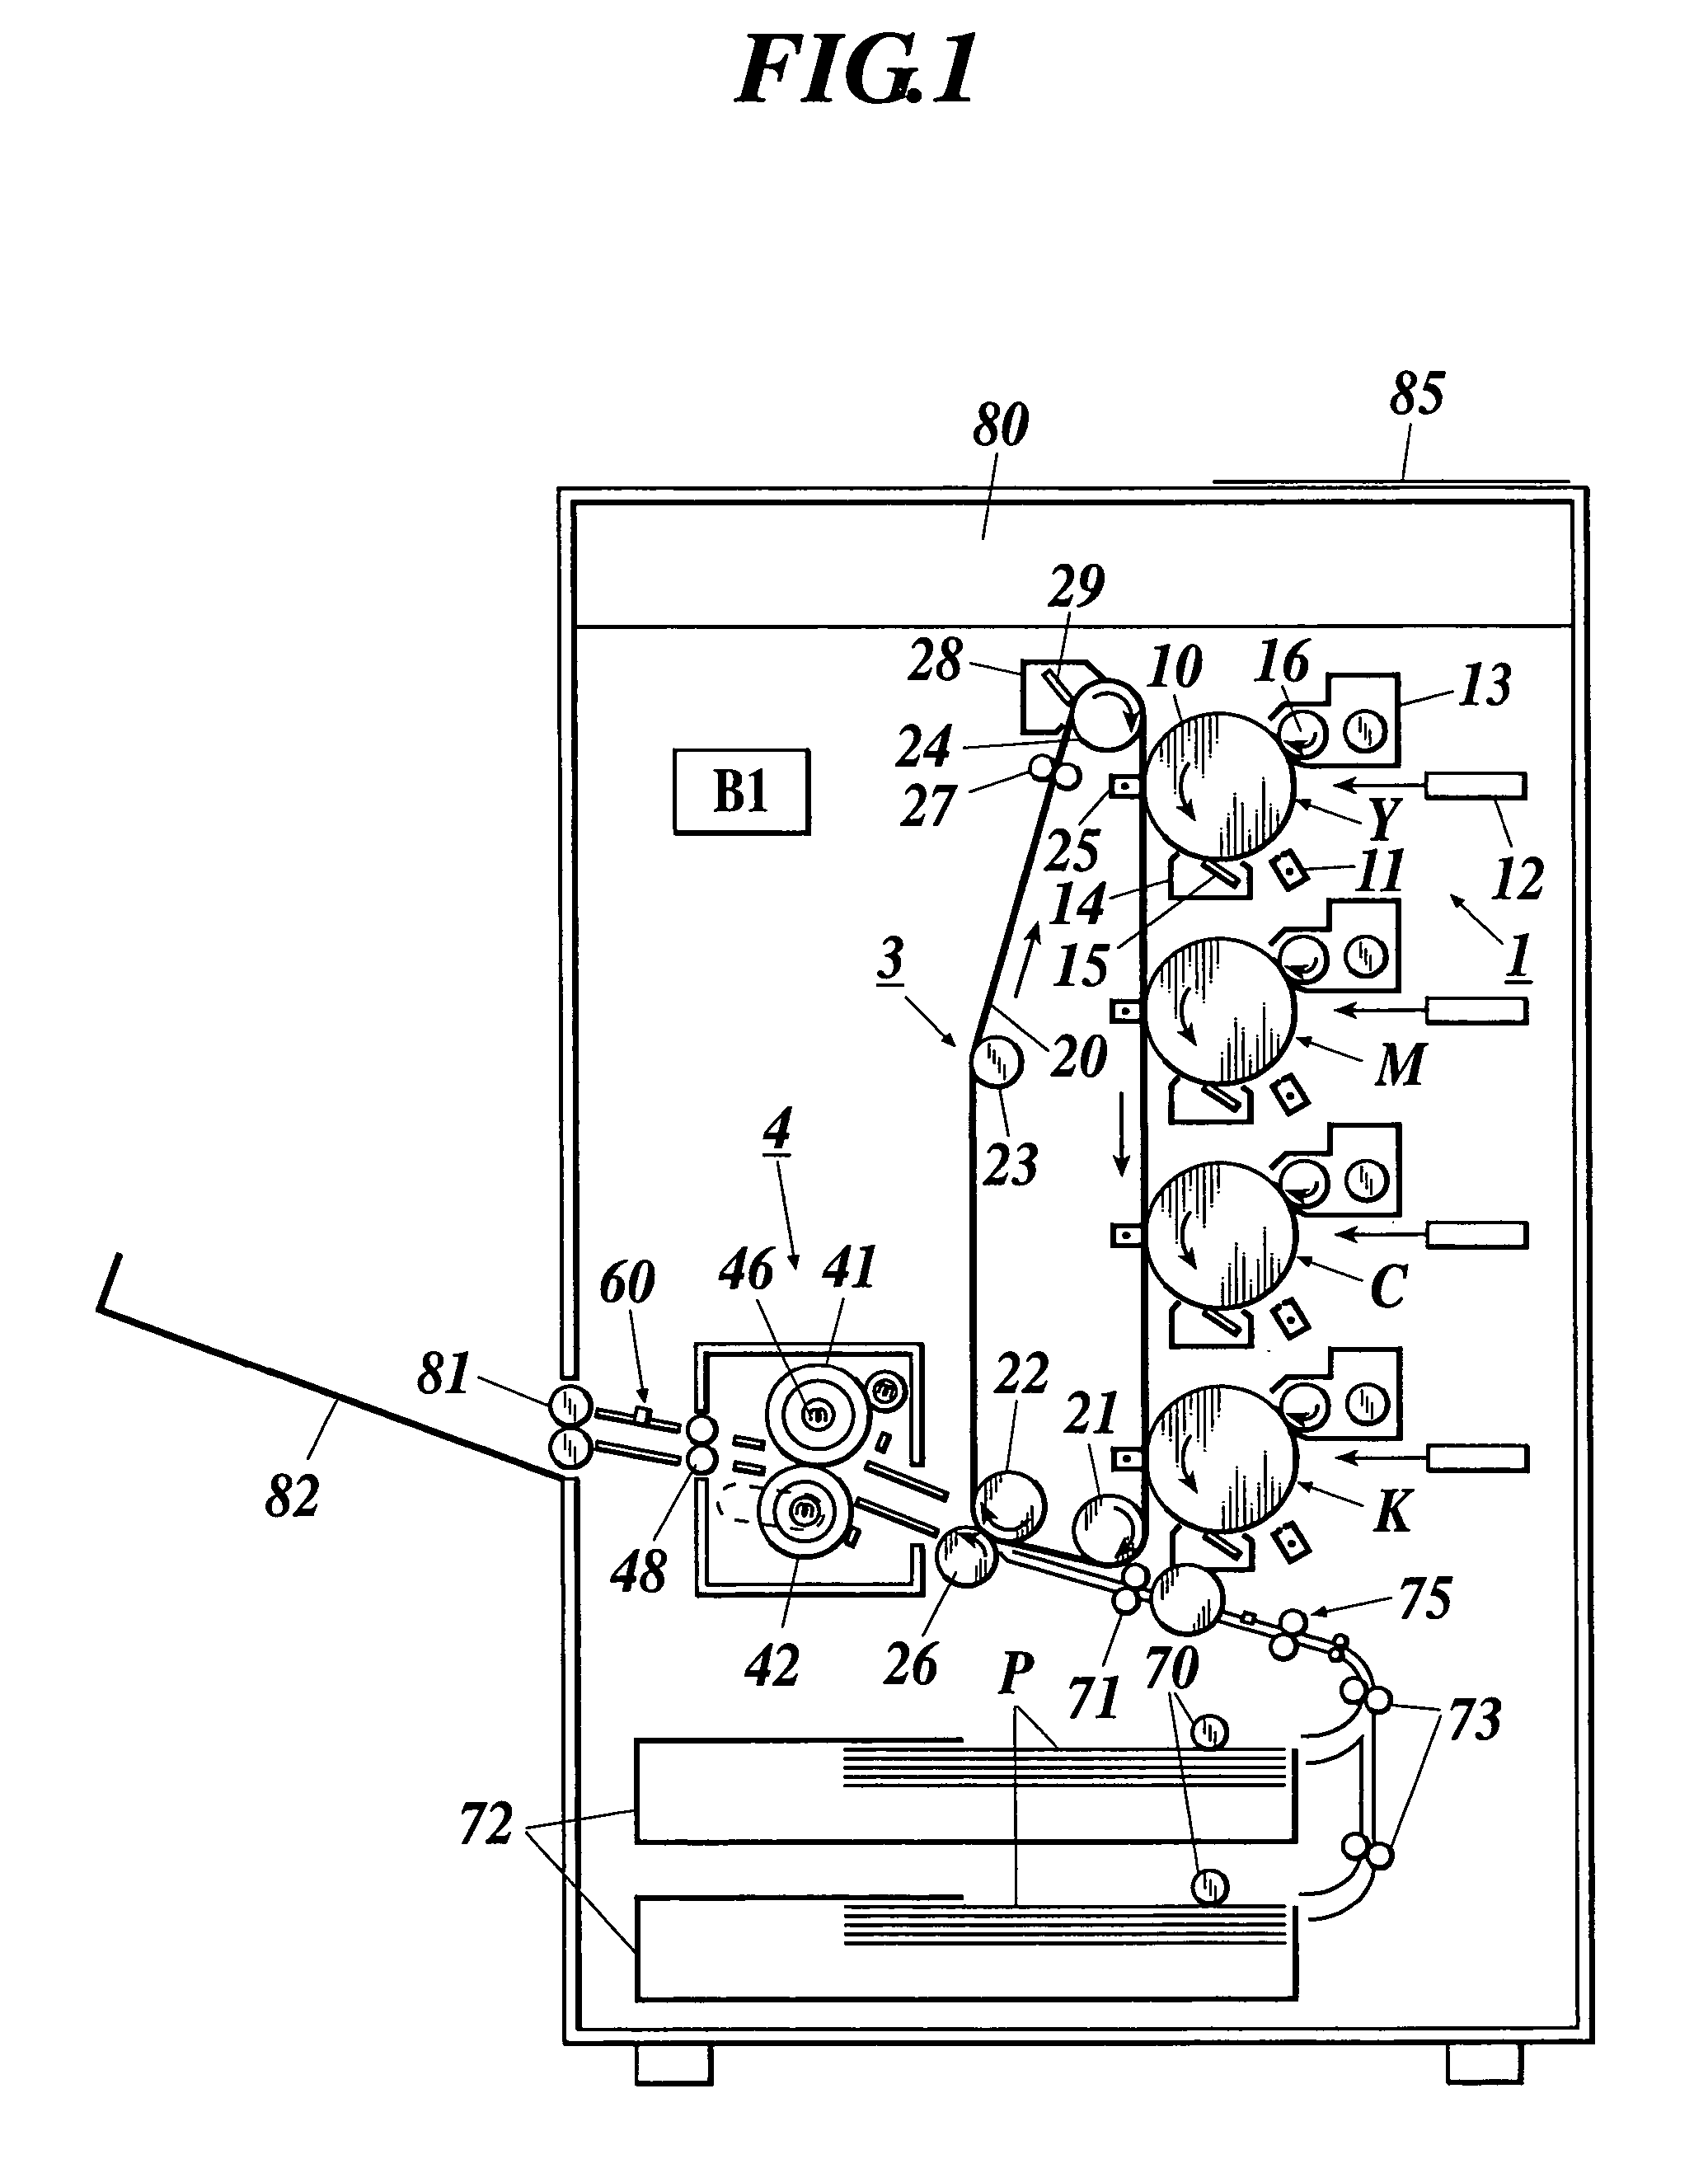 Gloss difference control in a plurality of networked image forming apparatus